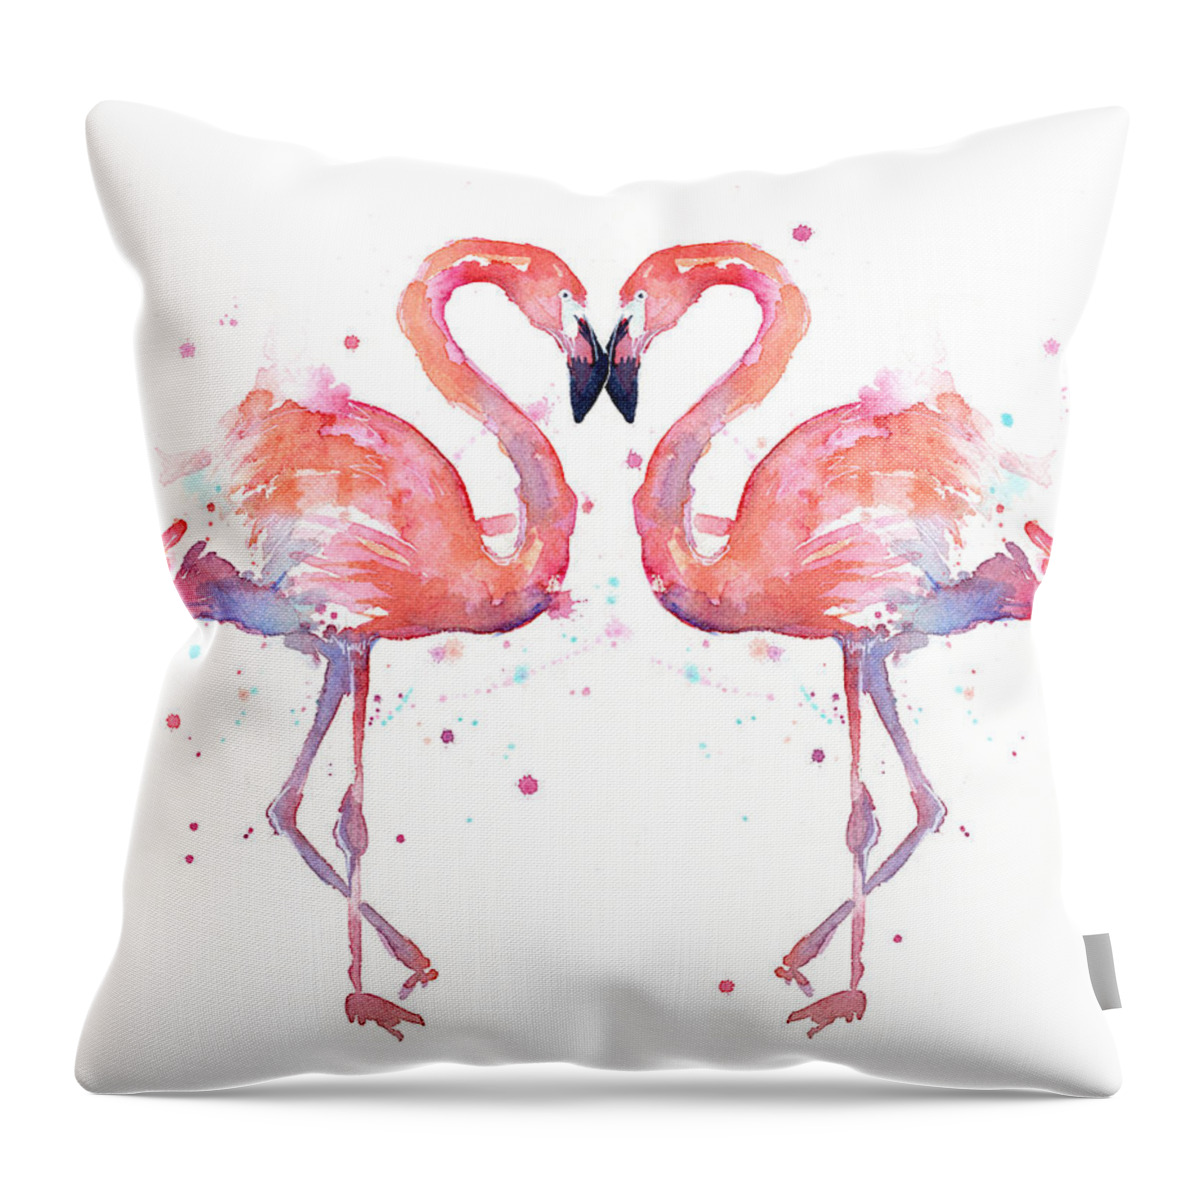 Watercolor Throw Pillow featuring the painting Flamingo Love Watercolor by Olga Shvartsur